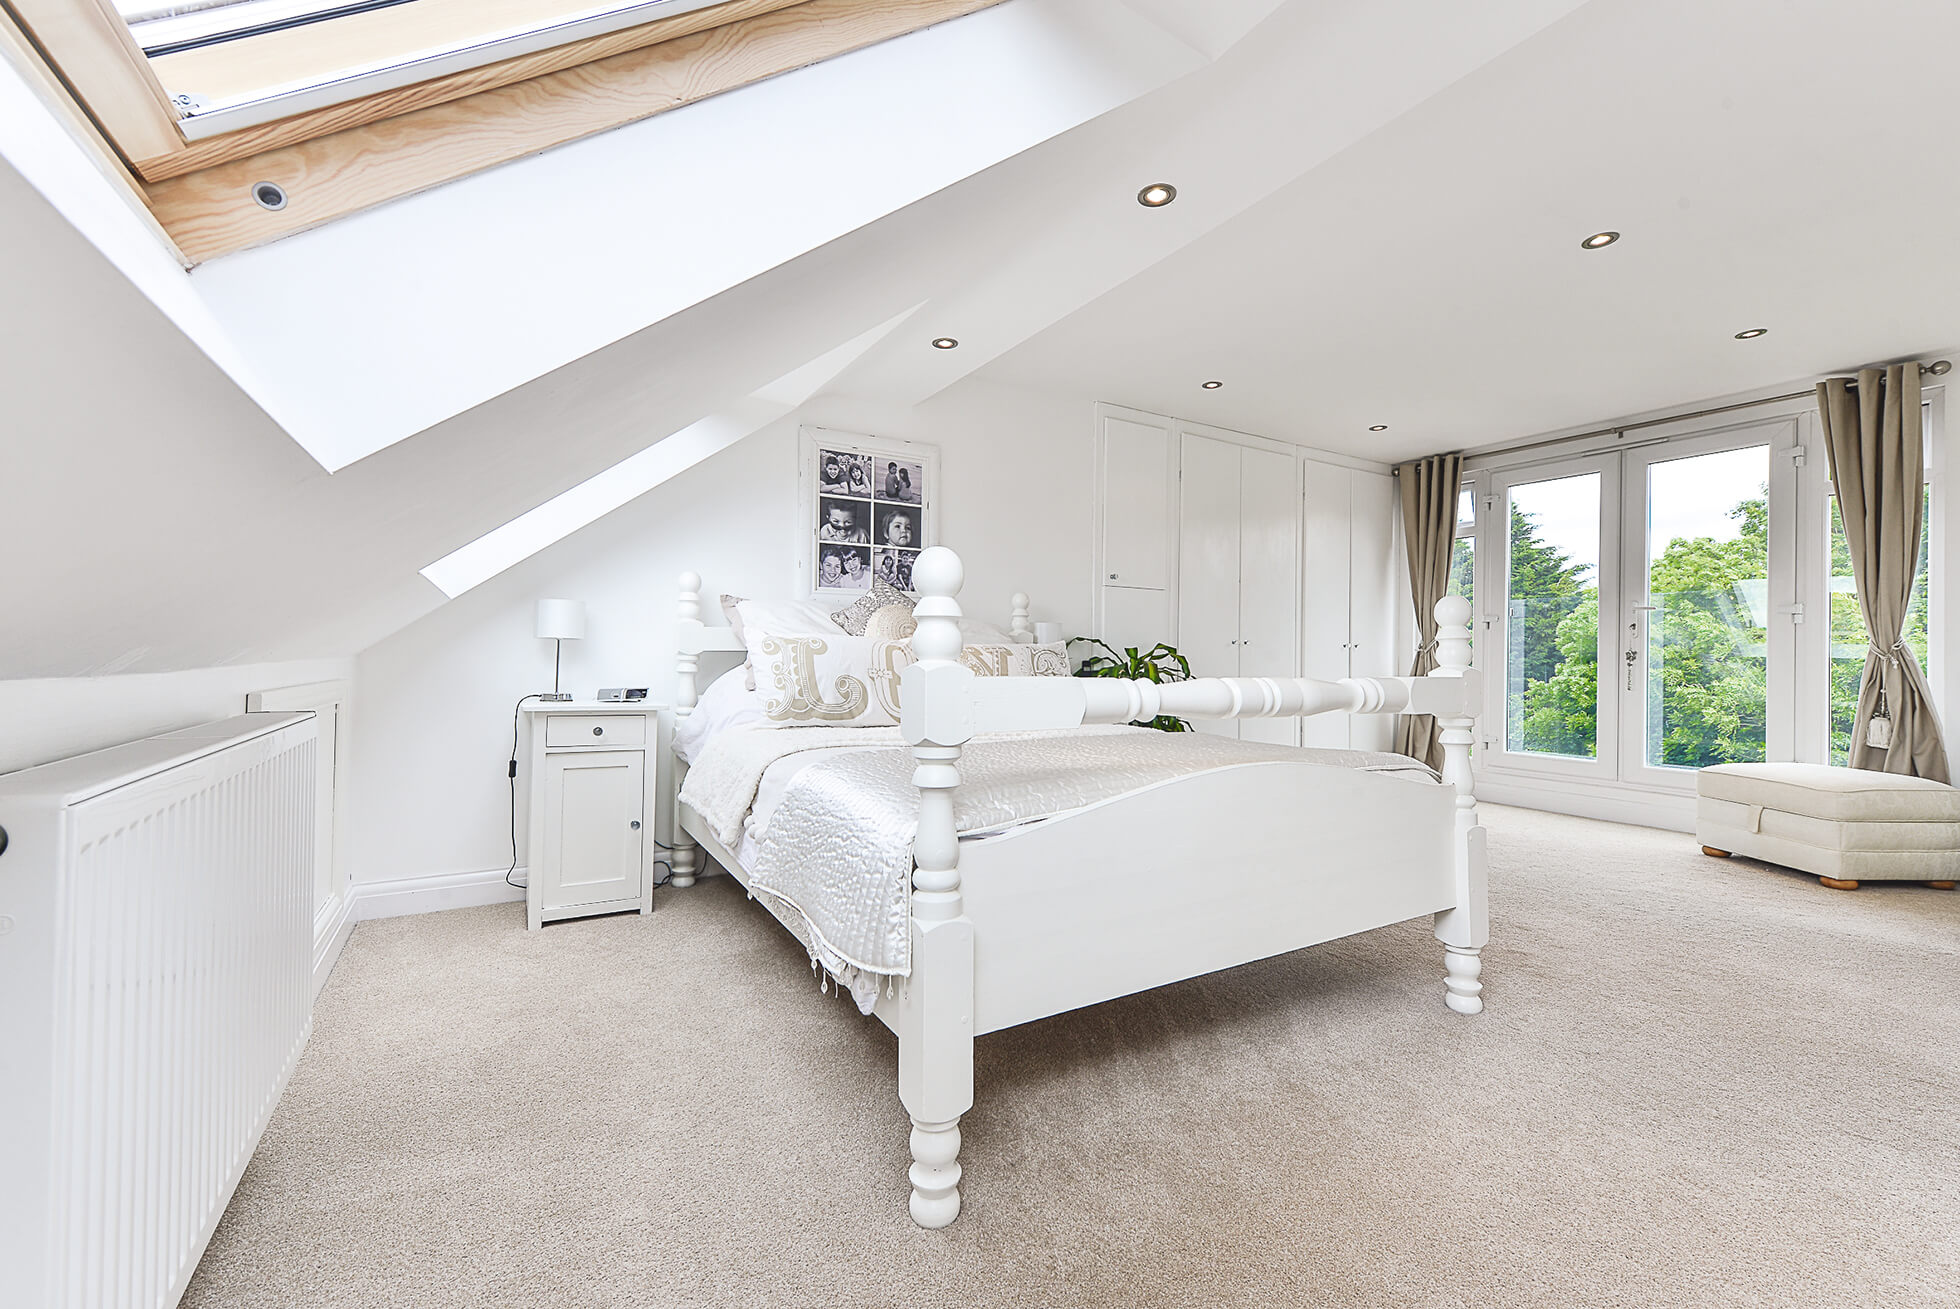 Do you have a question about converting your Loft in Frithsden? Here are the most popular questions asked by our clients.